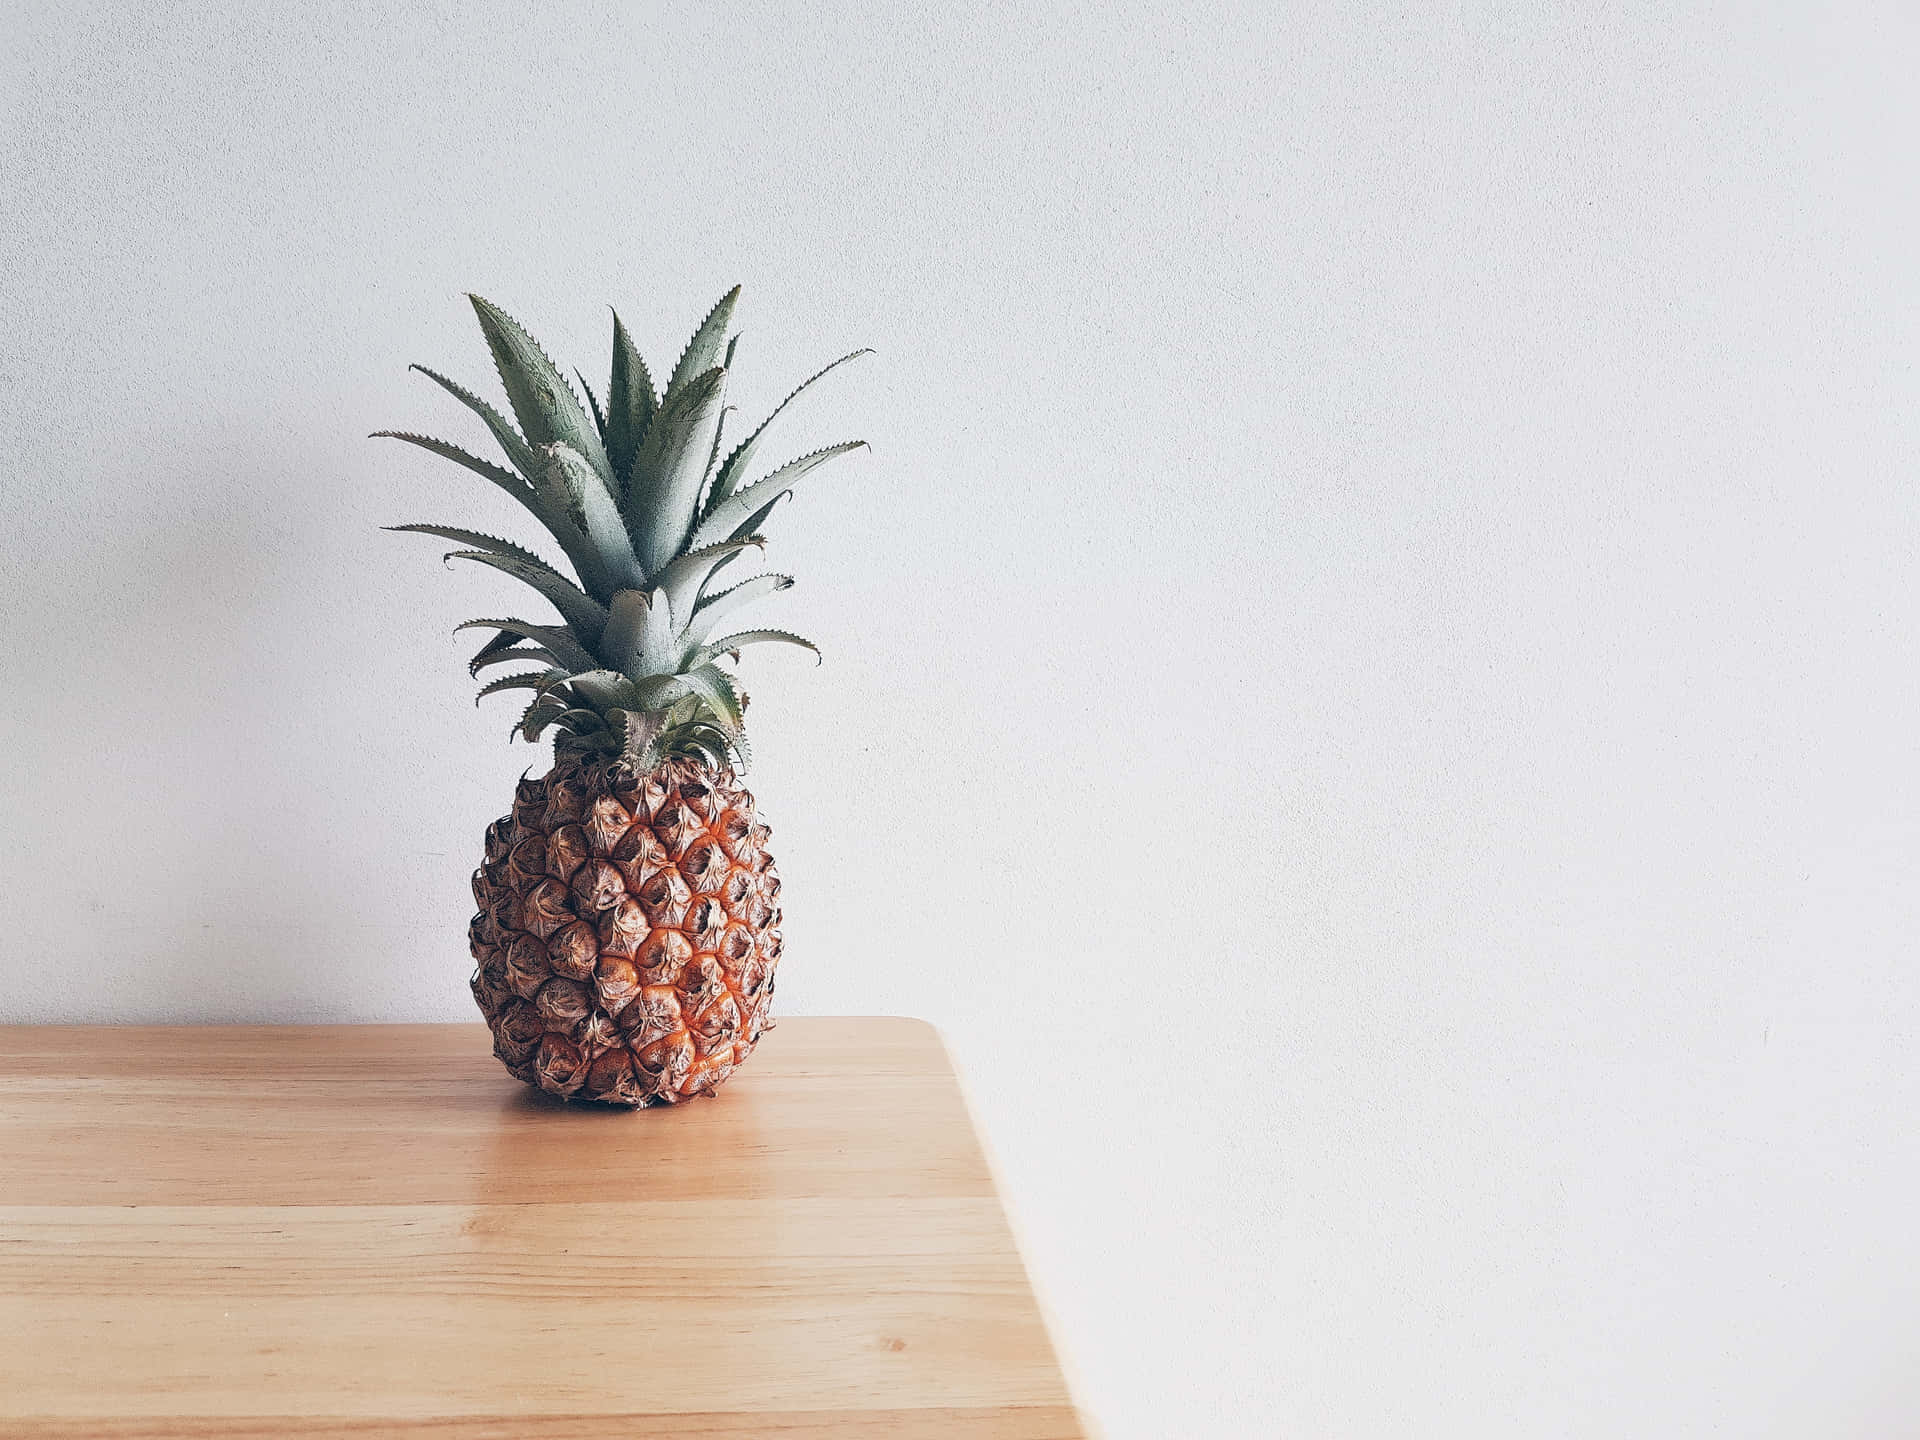 A Pineapple Sitting On A Wooden Table